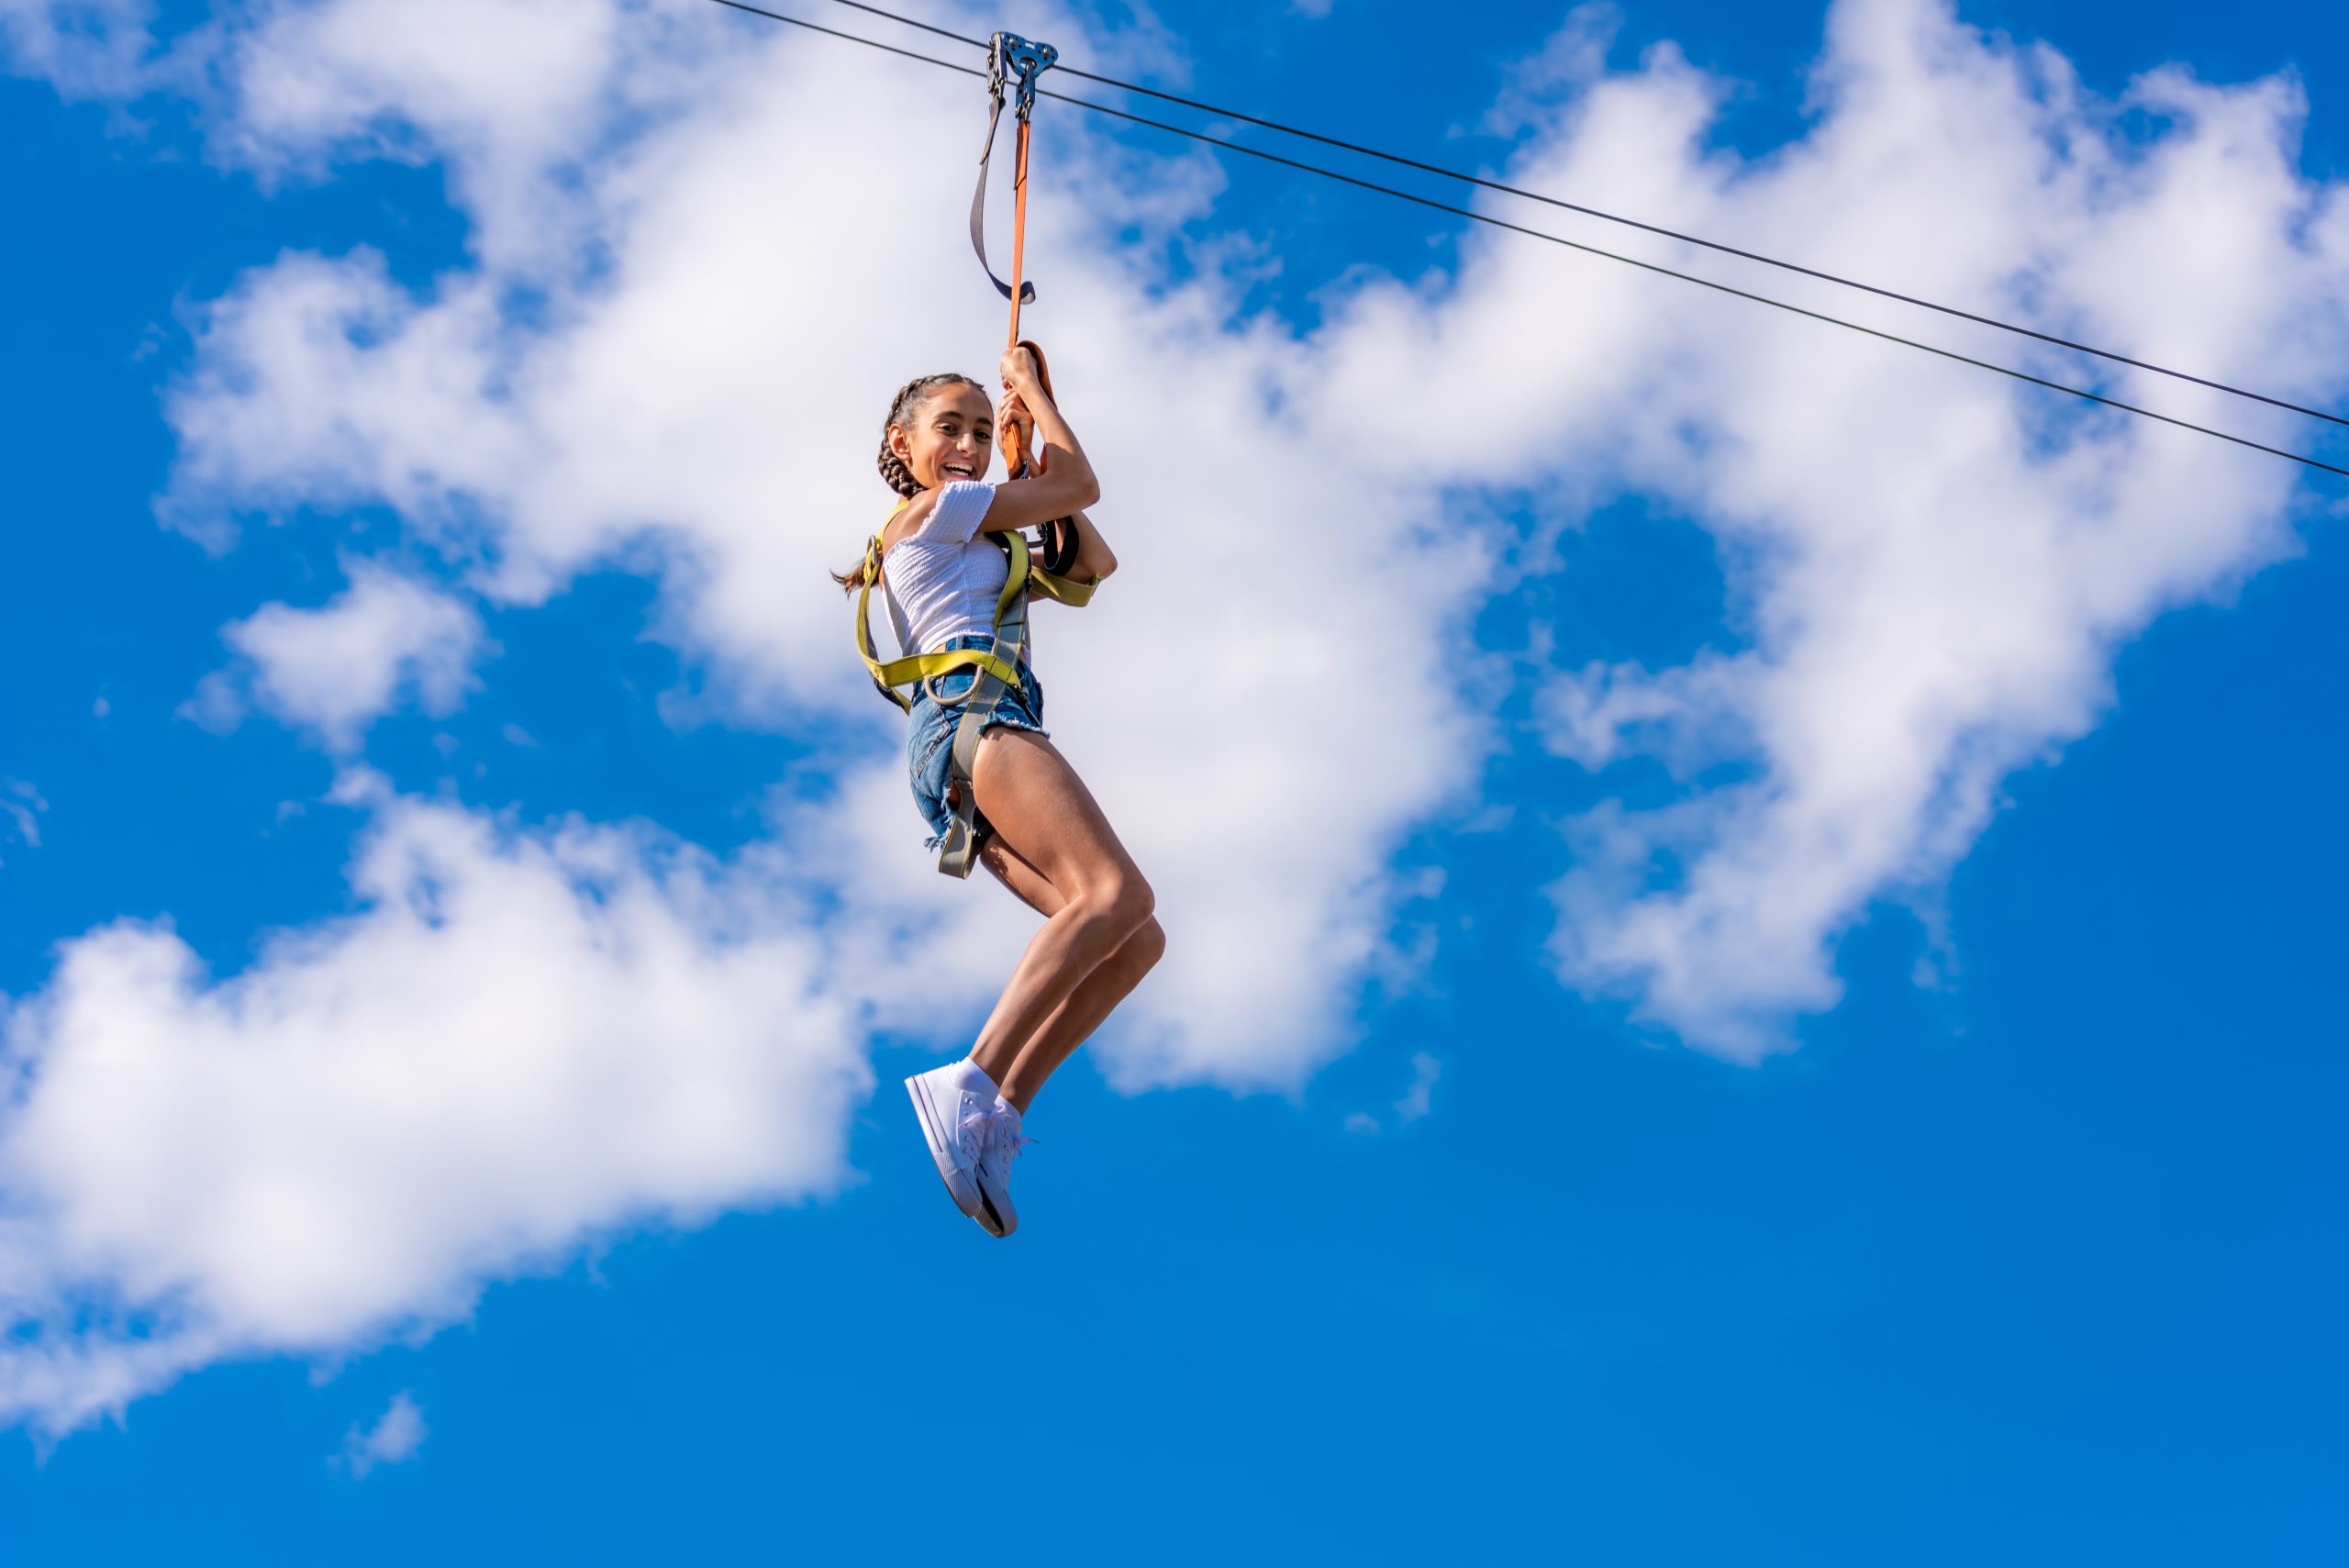 Young girl smiling on the Zip Line with the clouds in the background